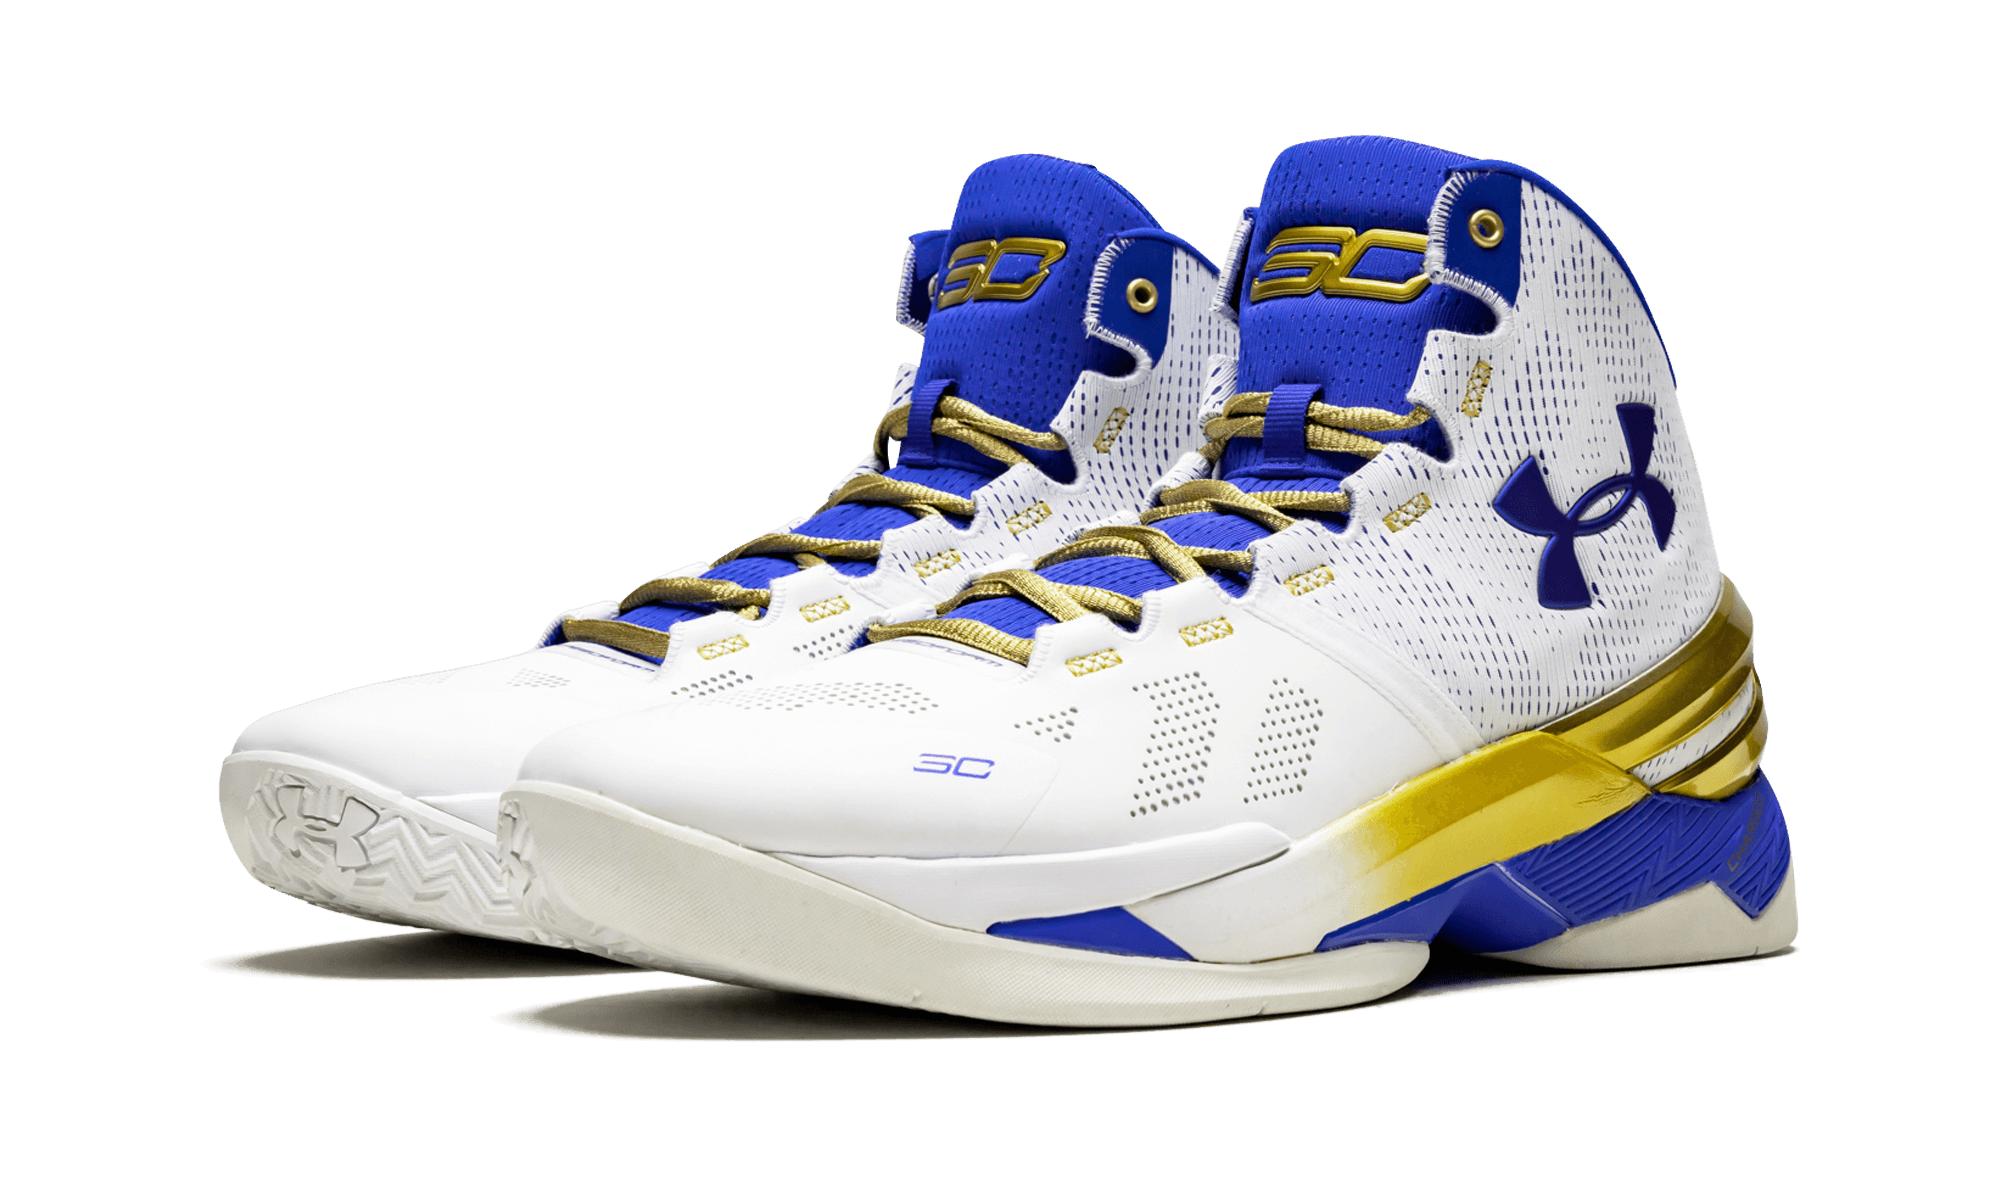 curry 2 gold rings